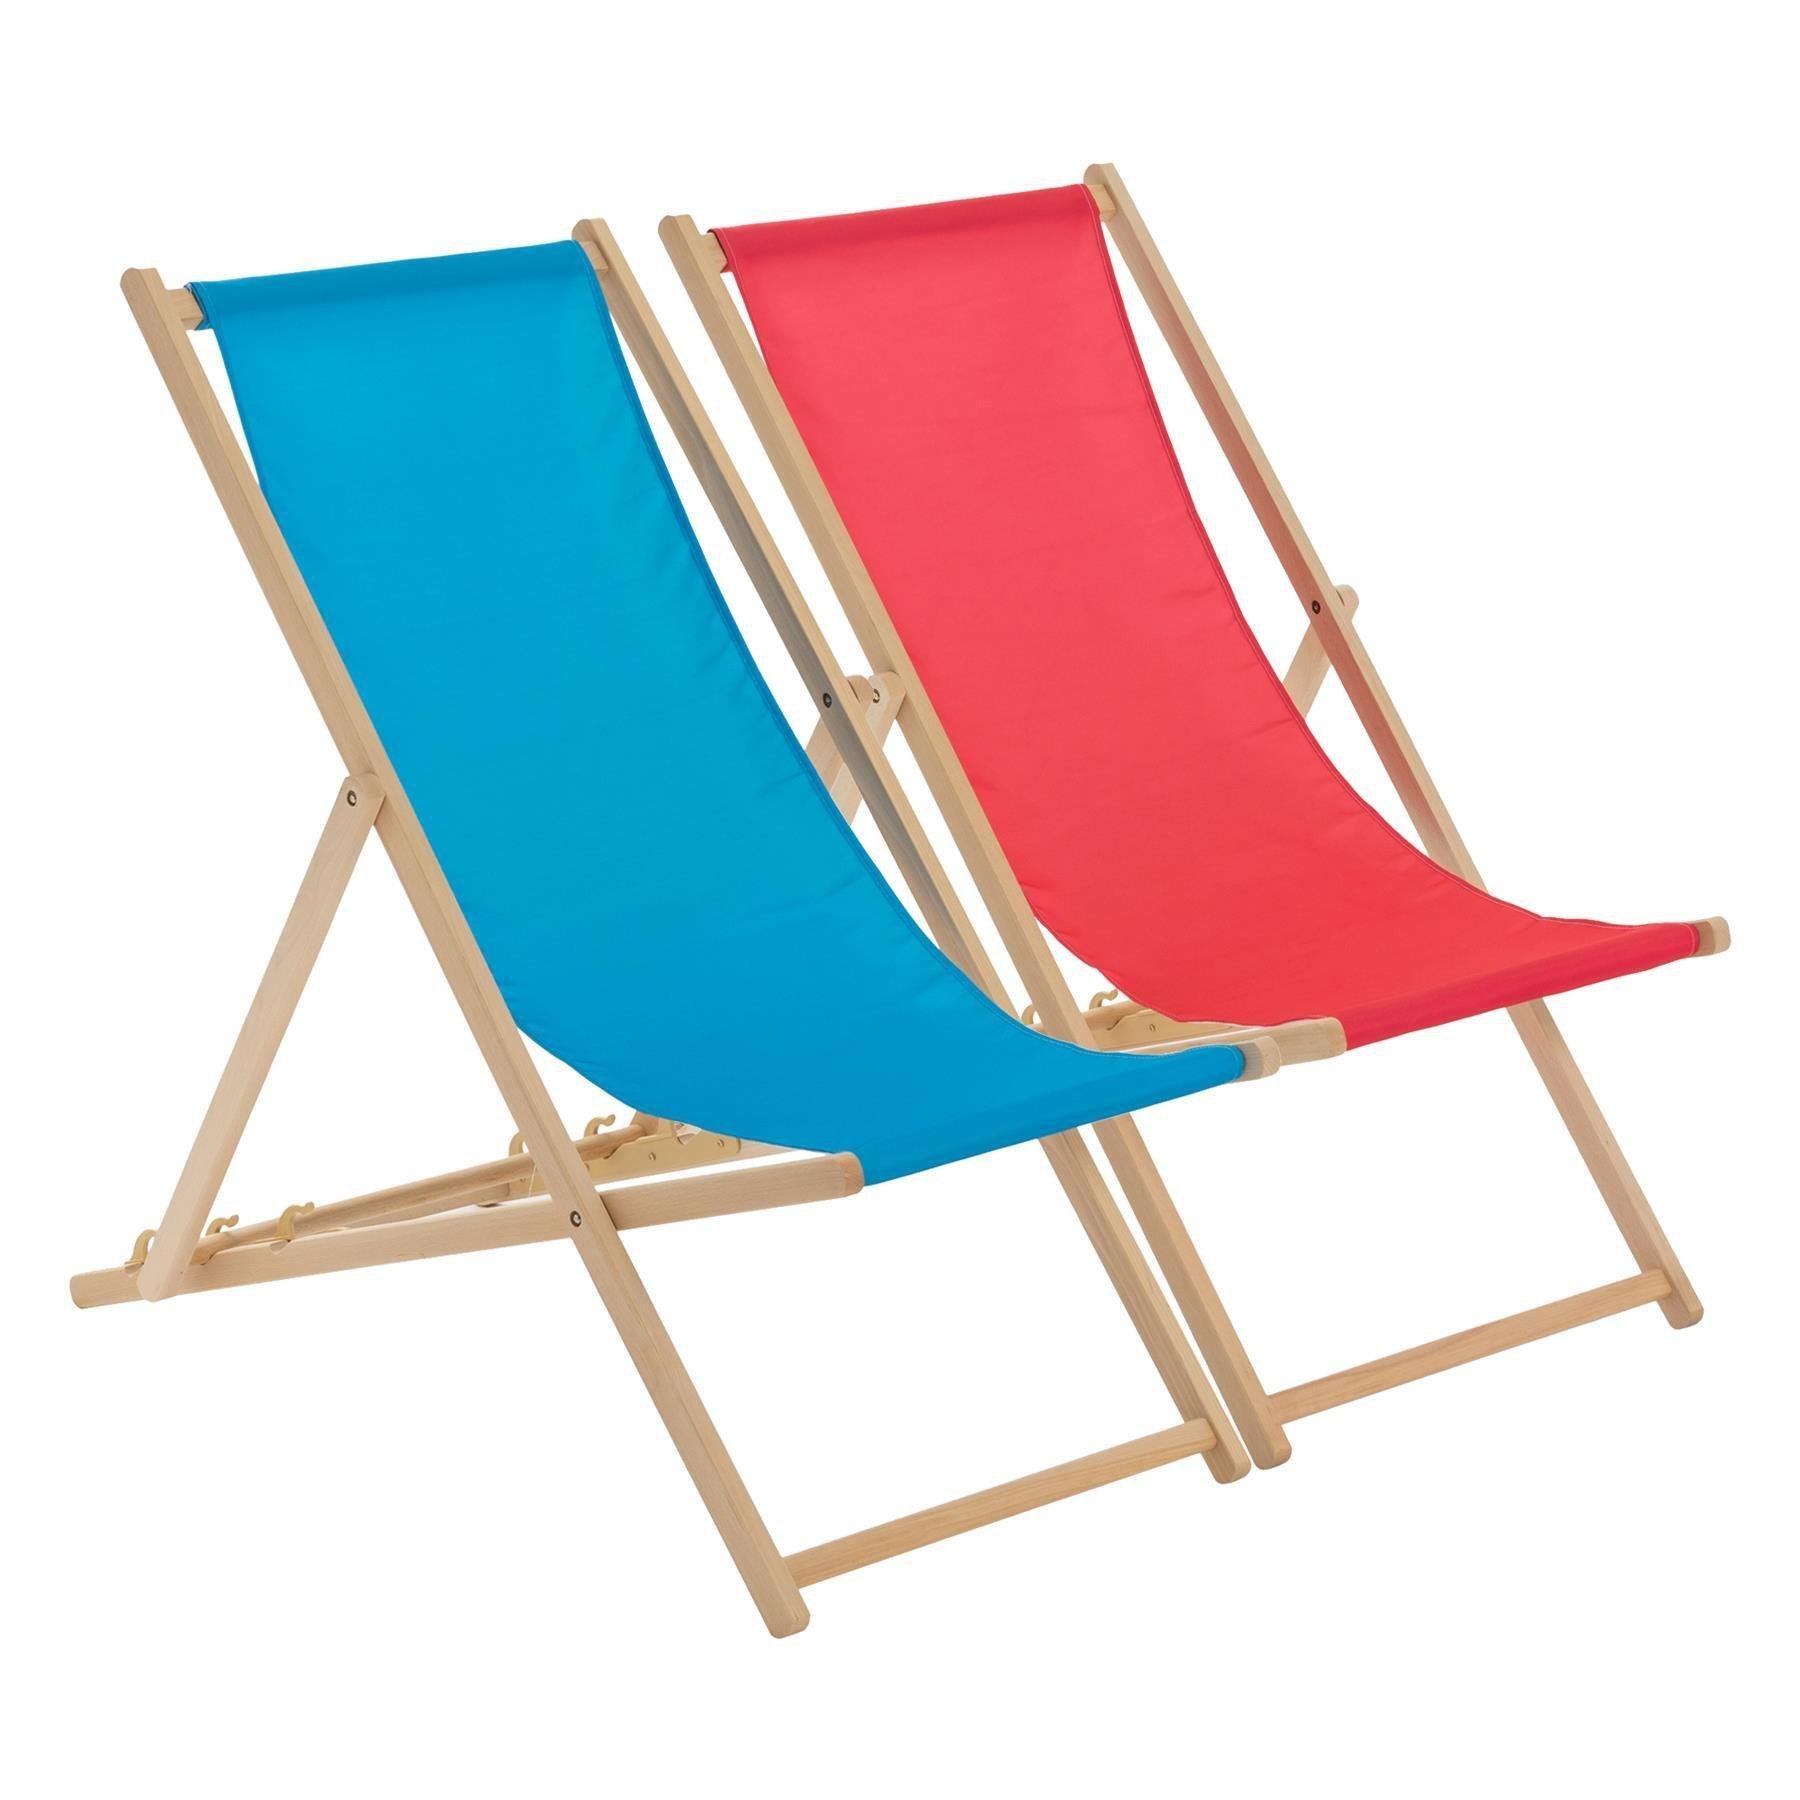 Folding Wooden Deck Chairs Pink/Light Blue Pack of 2 - image 1